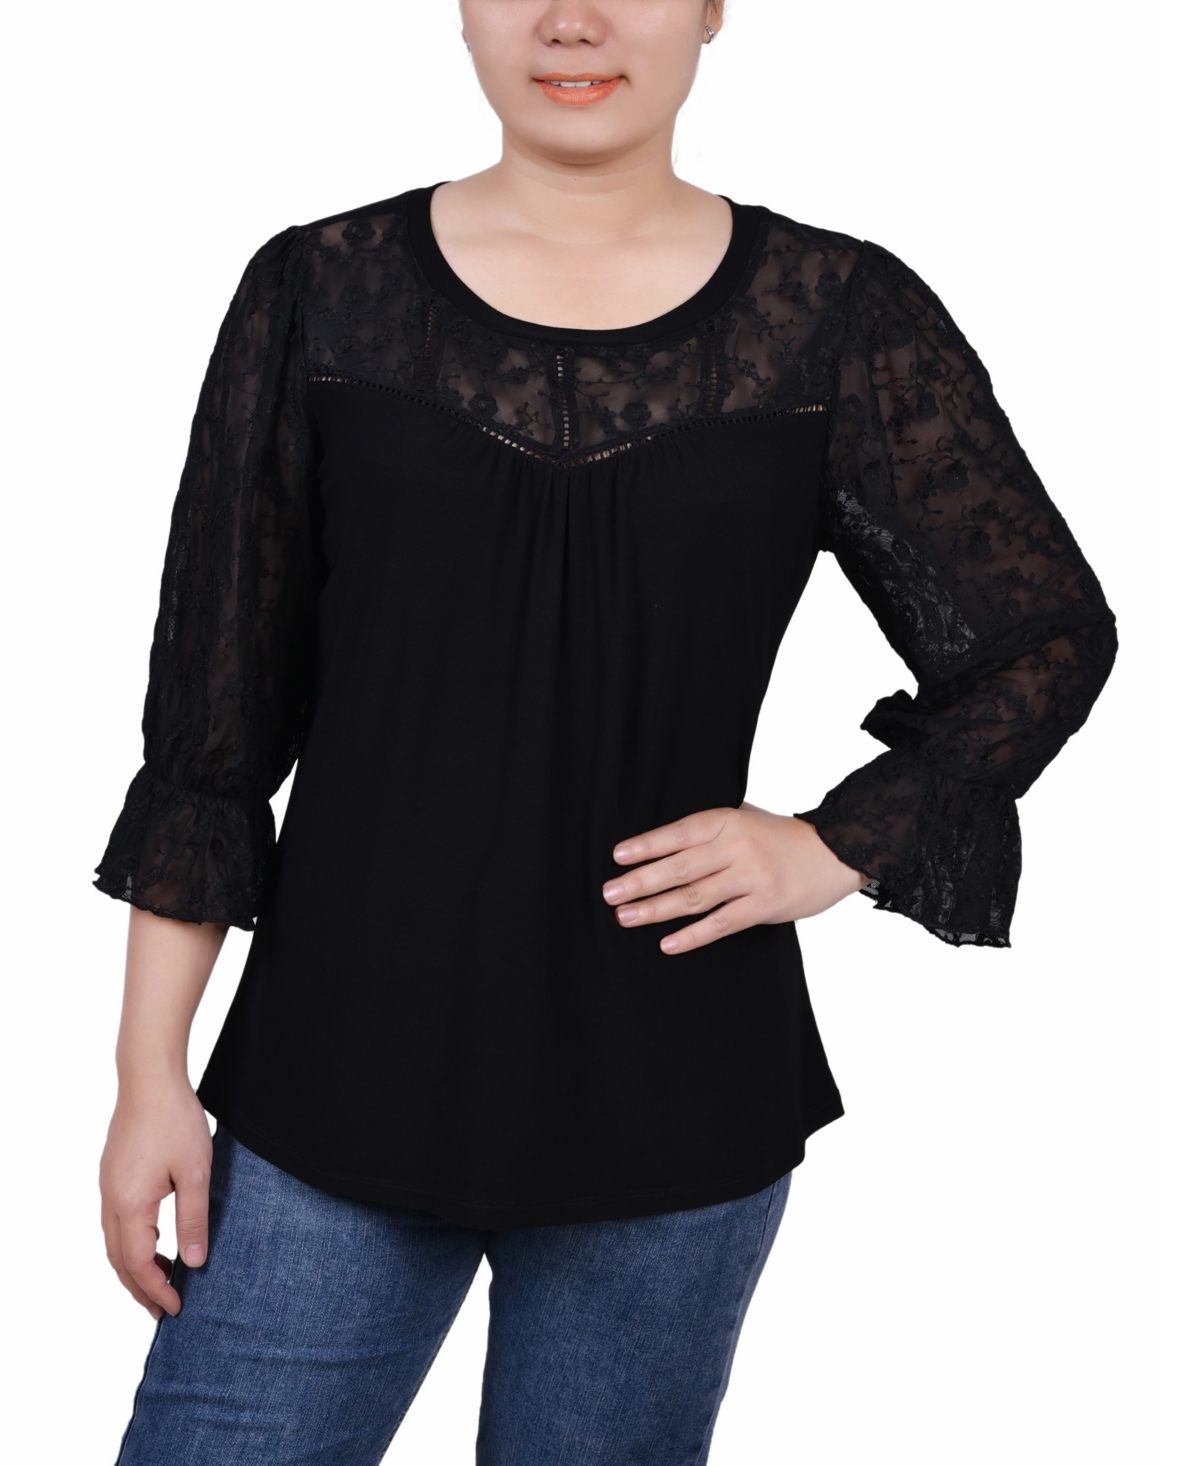 Petite 3/4 Sleeve with Embroidered Mesh Yoke and Sleeves Crepe Top - Black